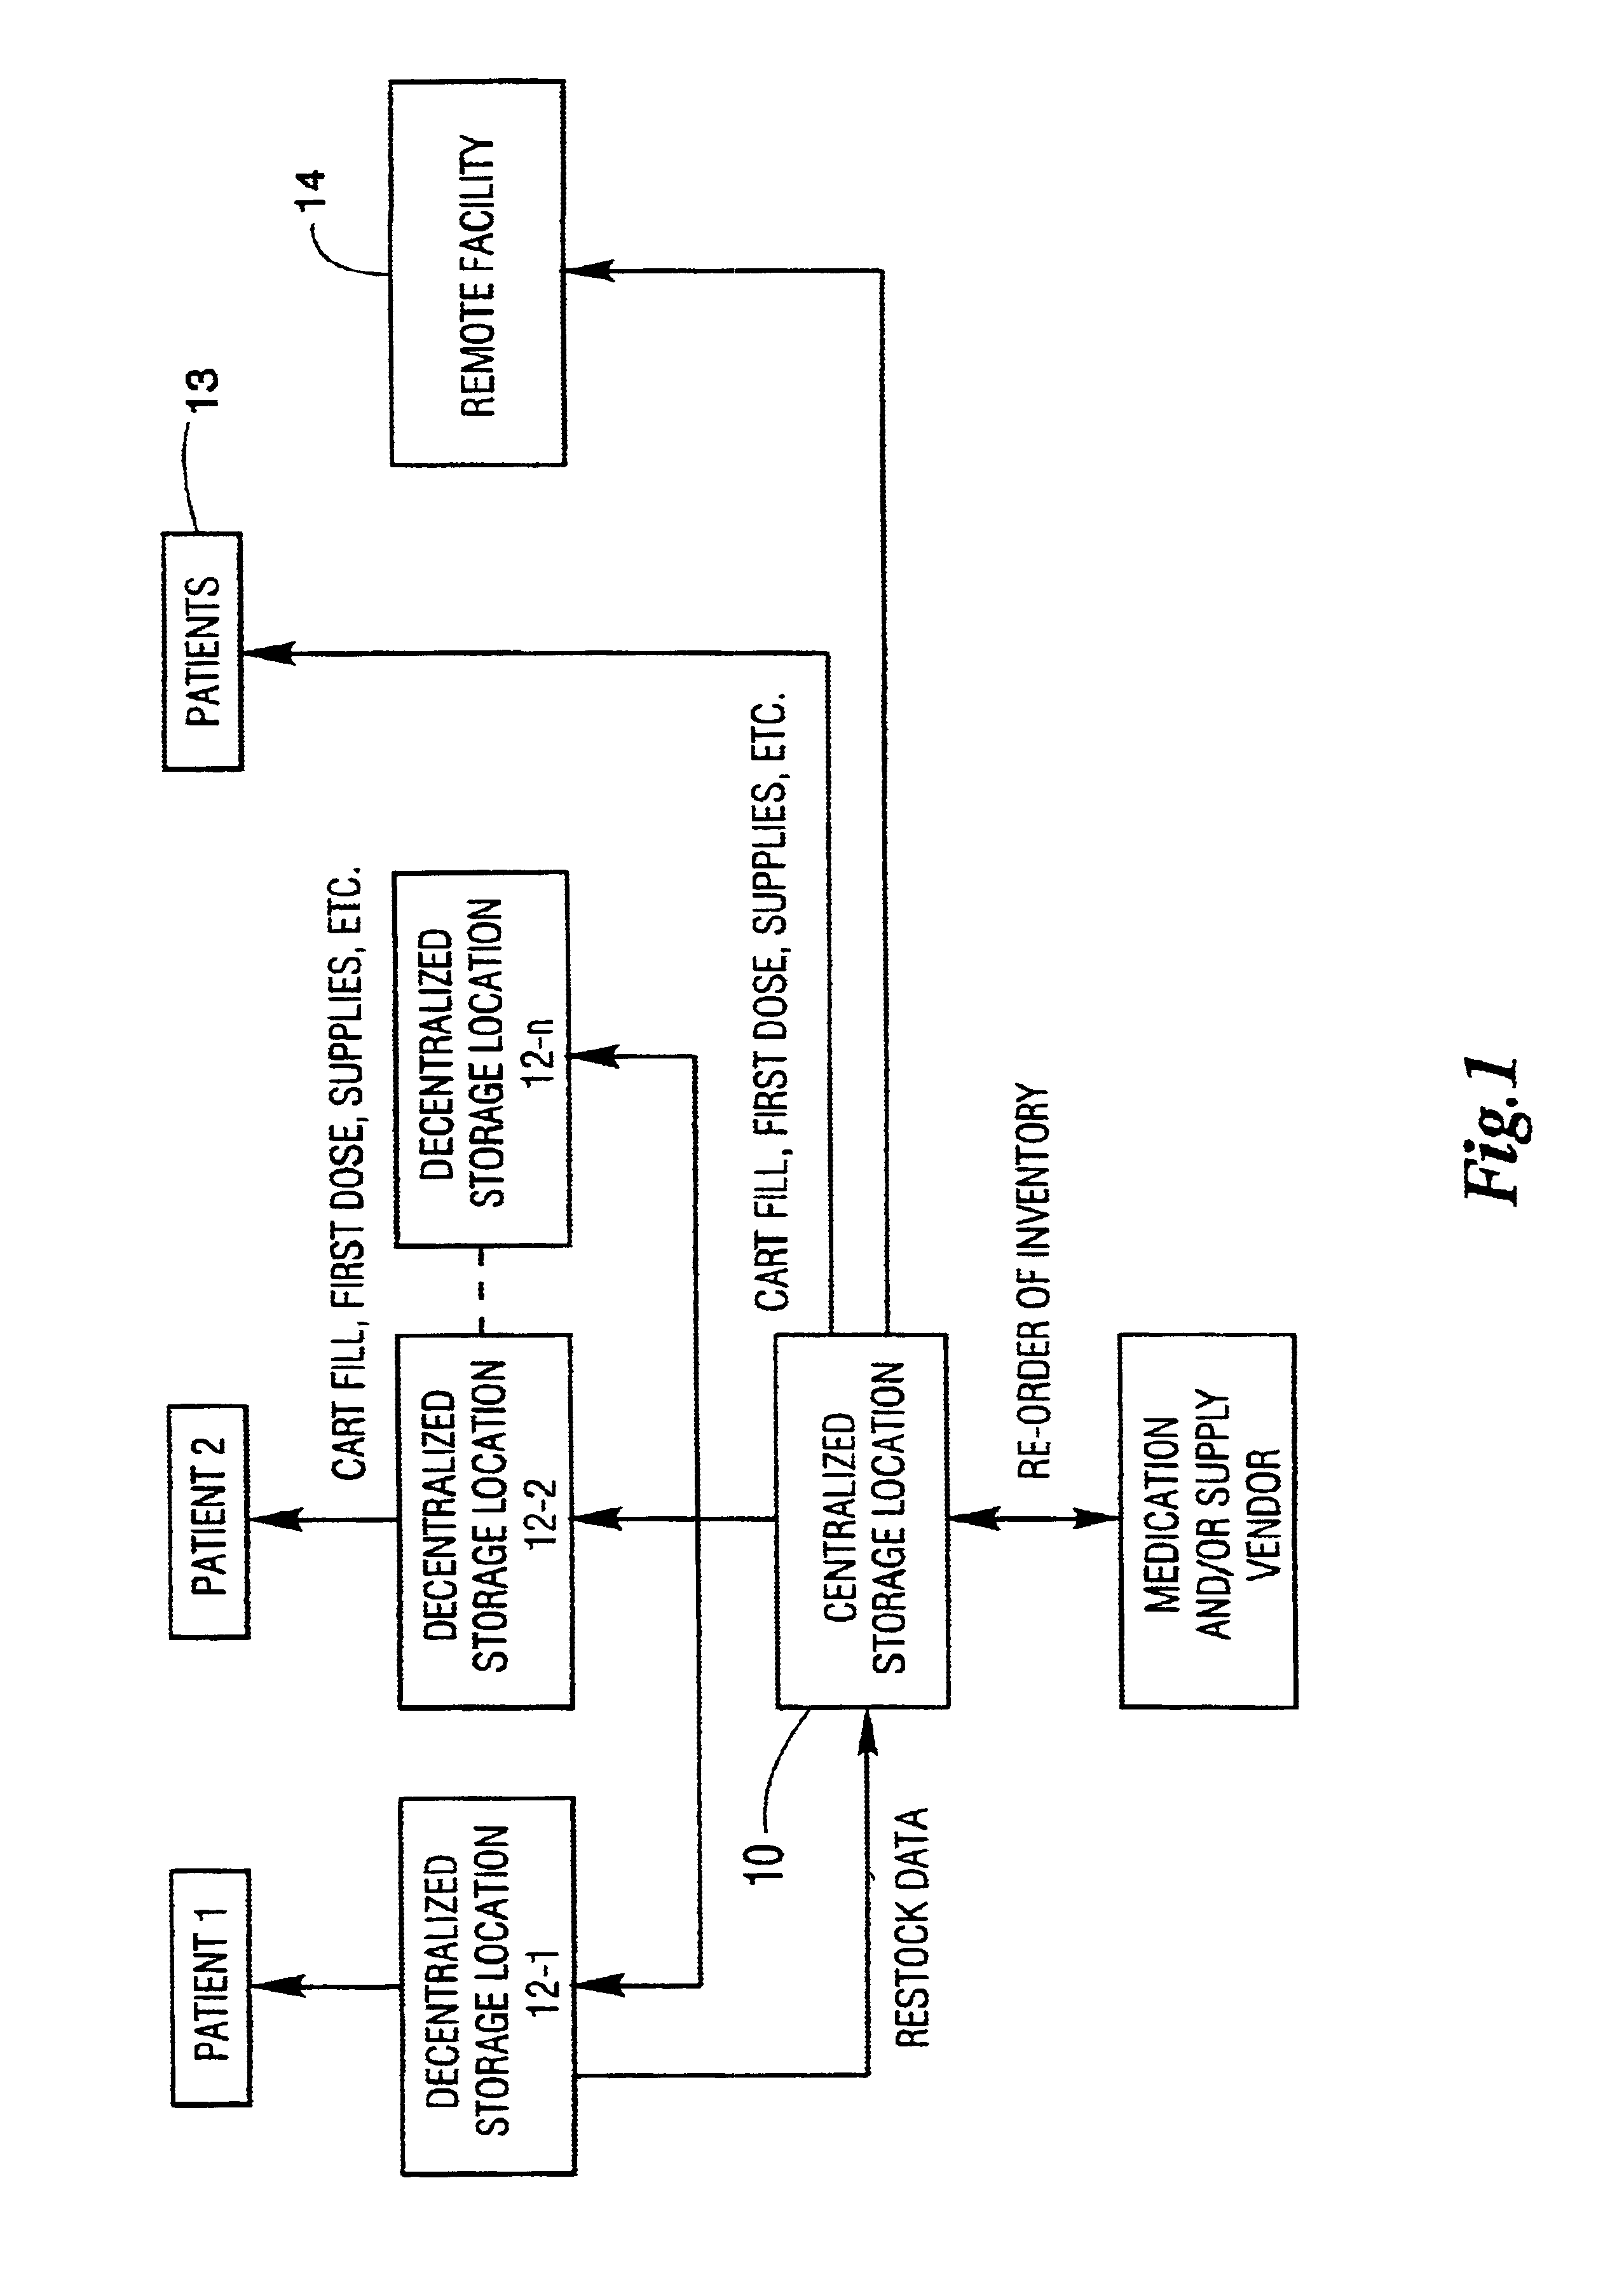 Carousel product for use in integrated restocking and dispensing system